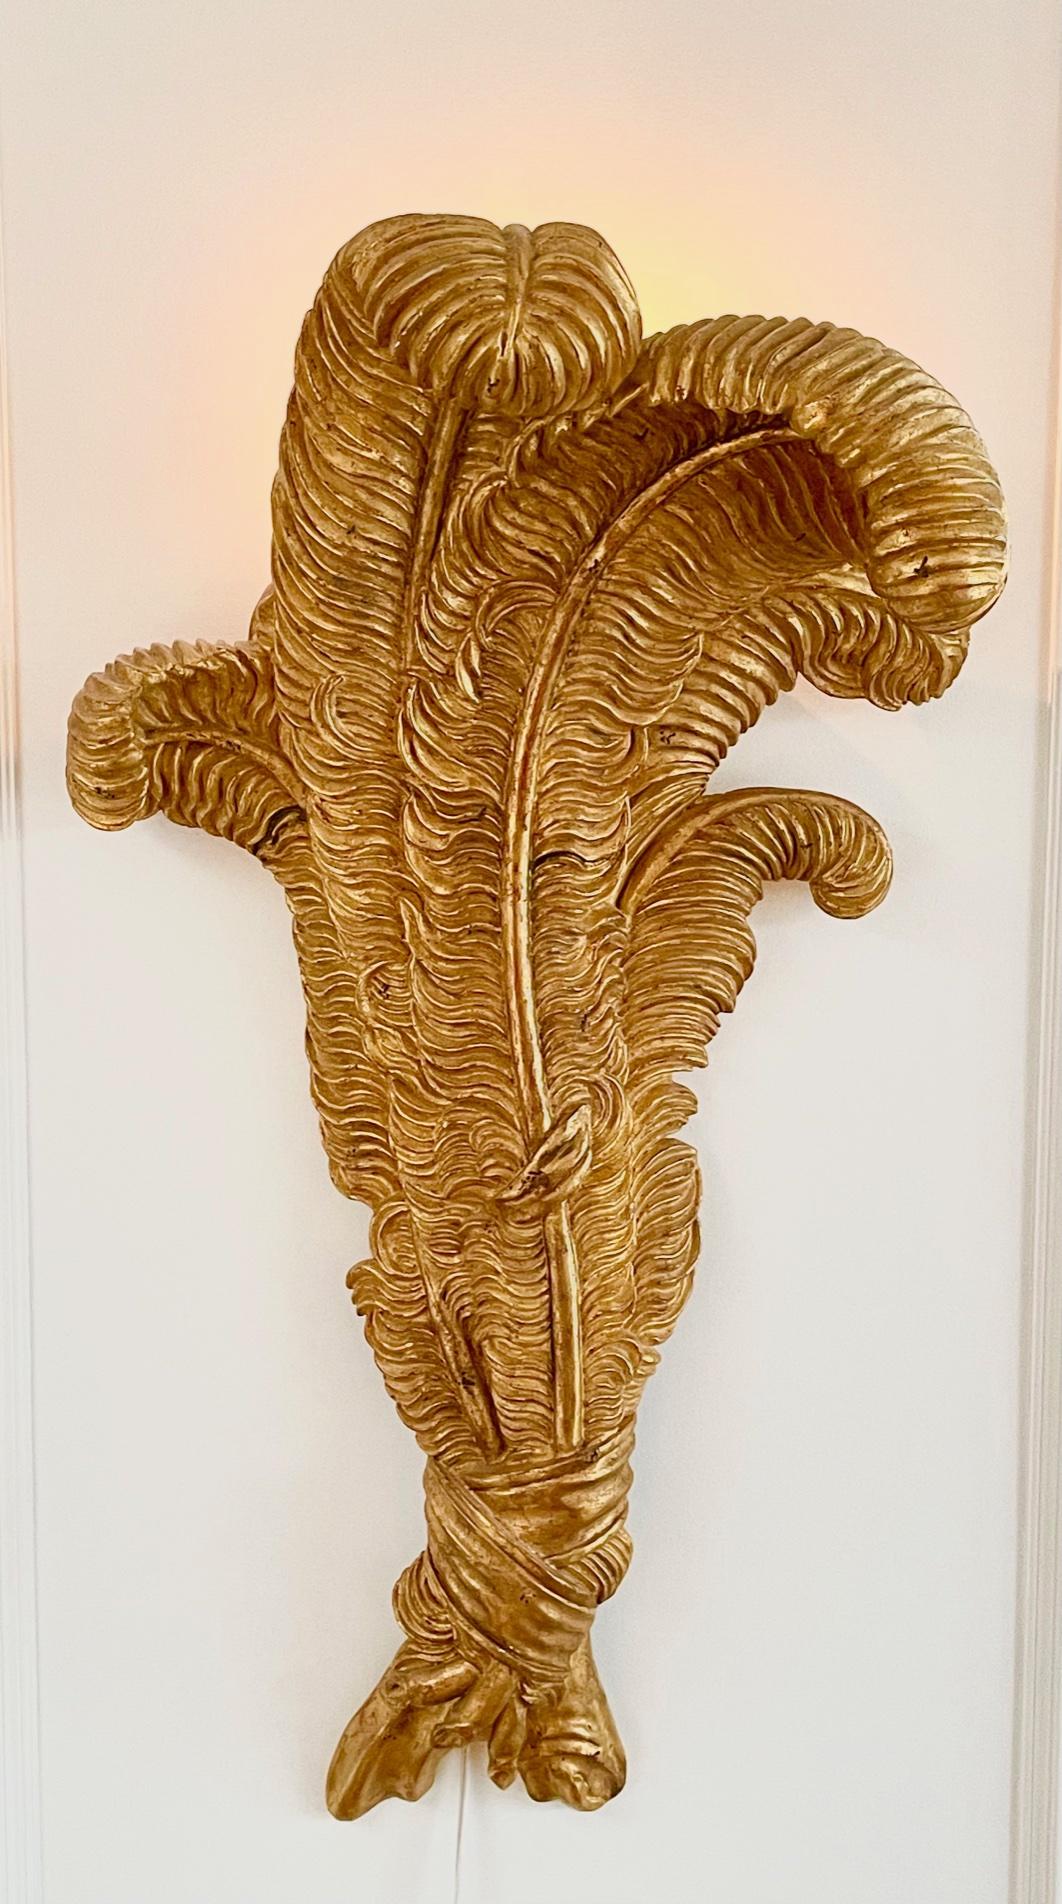 Very large pair of Maison Jansen Feather Sconces,
Large, rare and exceptionnal pair of Maison Jansen Feather Sconces, inspired by the Prince of Wales Feathers. 
Stéphane Boudin of Maison Jansen worked with the Duke of Windsor, former Prince of